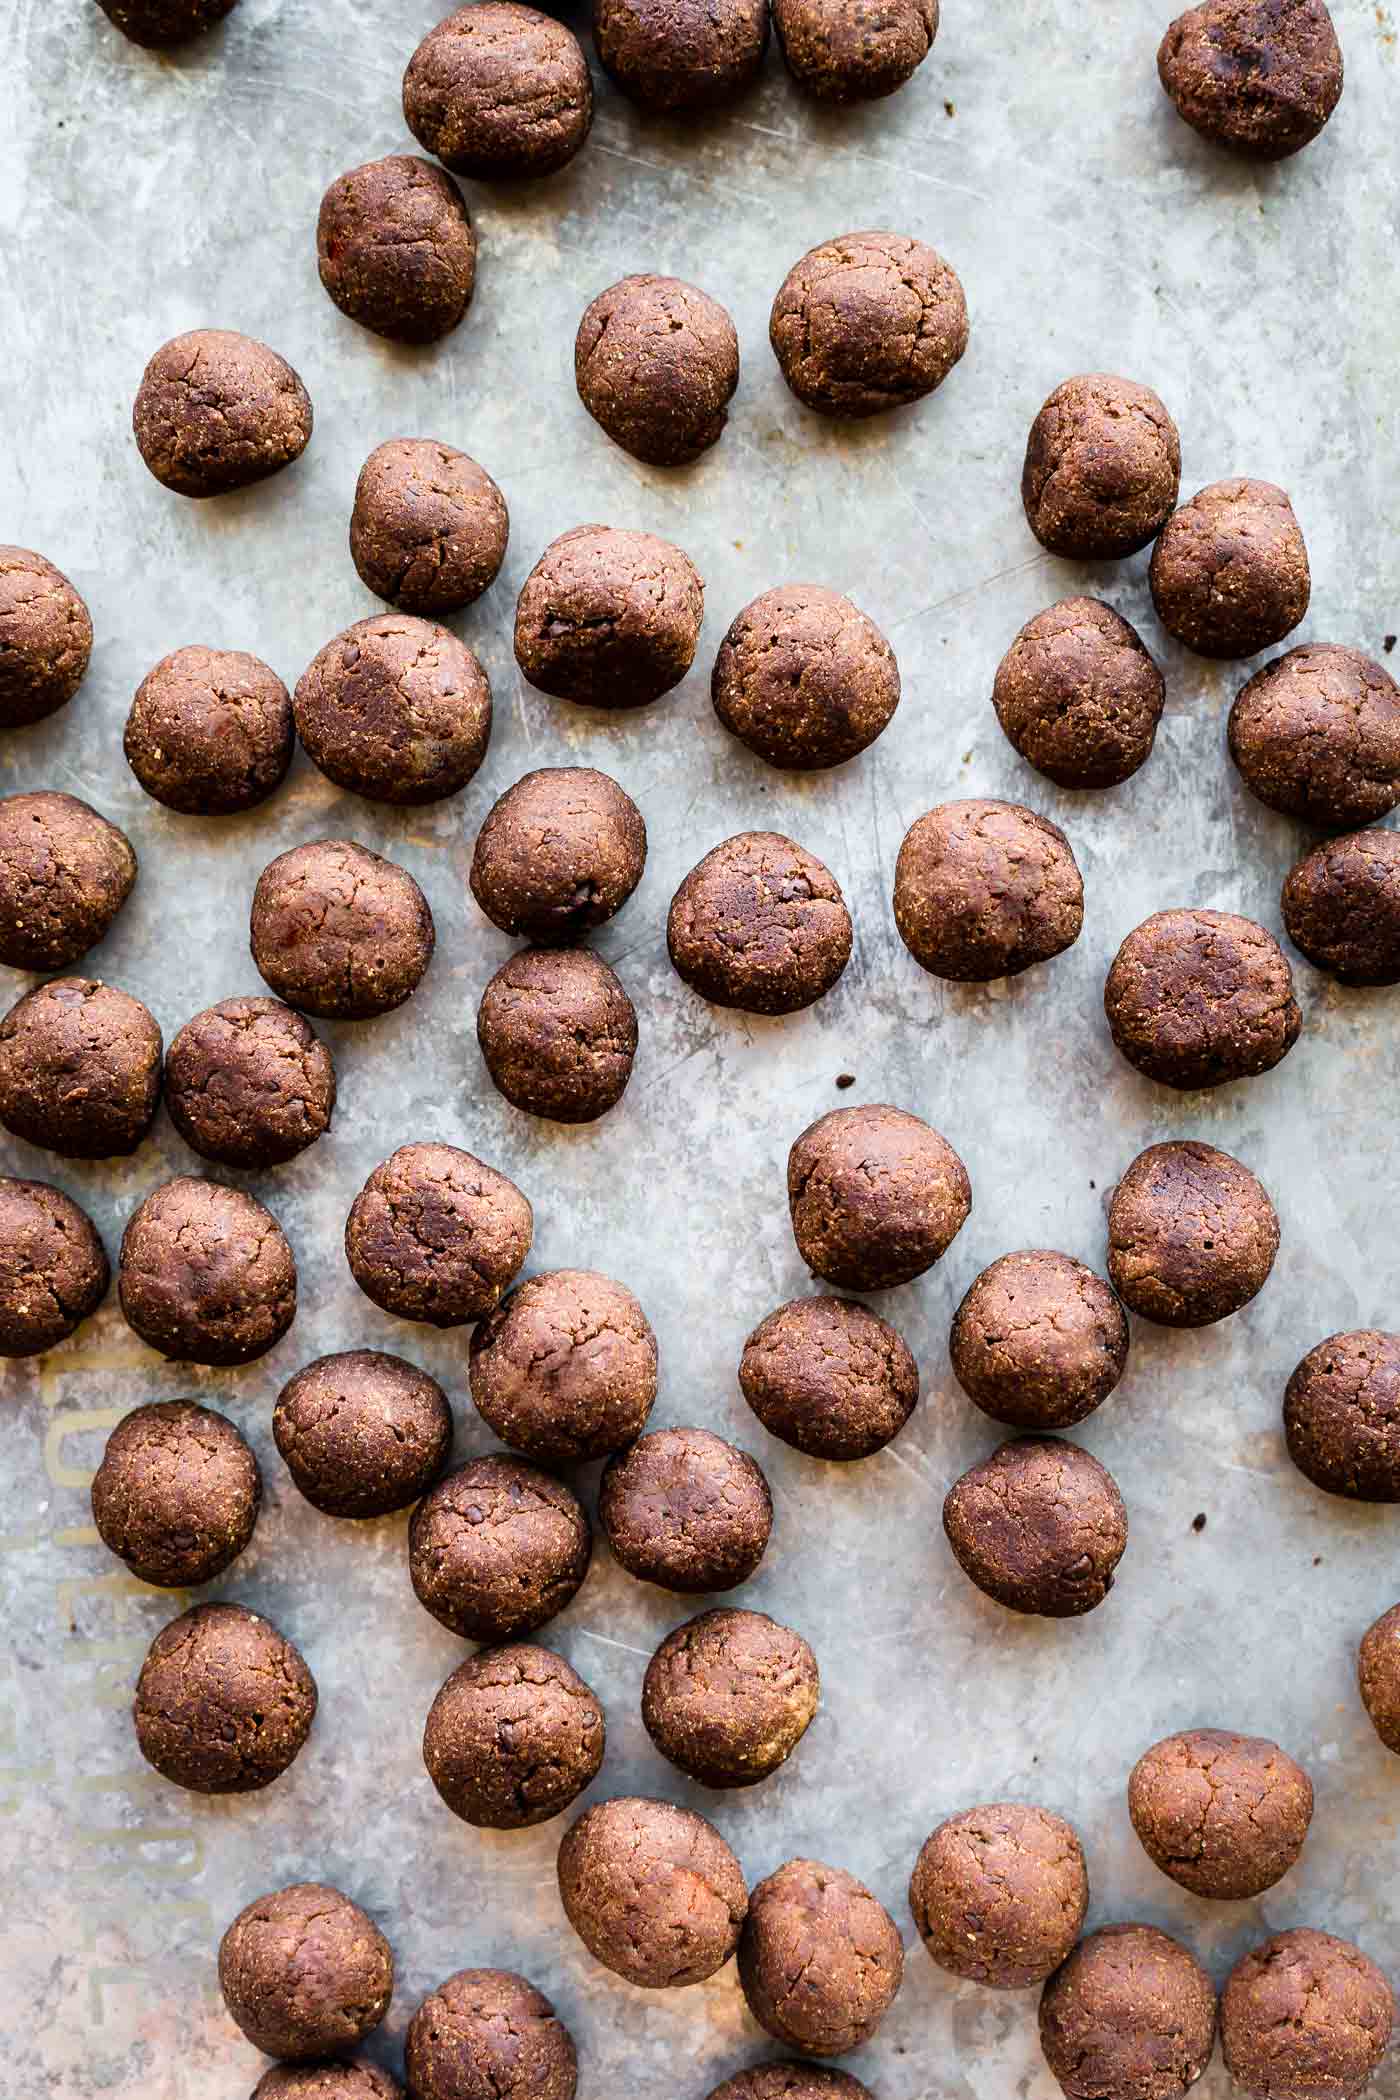 Cookie Crunch Cocoa Puffs Homemade Cereal made with just 5 Ingredients! Gluten Free homemade cereal made right in your kitchen. Healthier, real food based, and so tasty! This Cocoa Puffs cereal tastes just like the real deal but better for you and budget friendly. You will be hooked! Nut free , Soy free, Gluten Free!